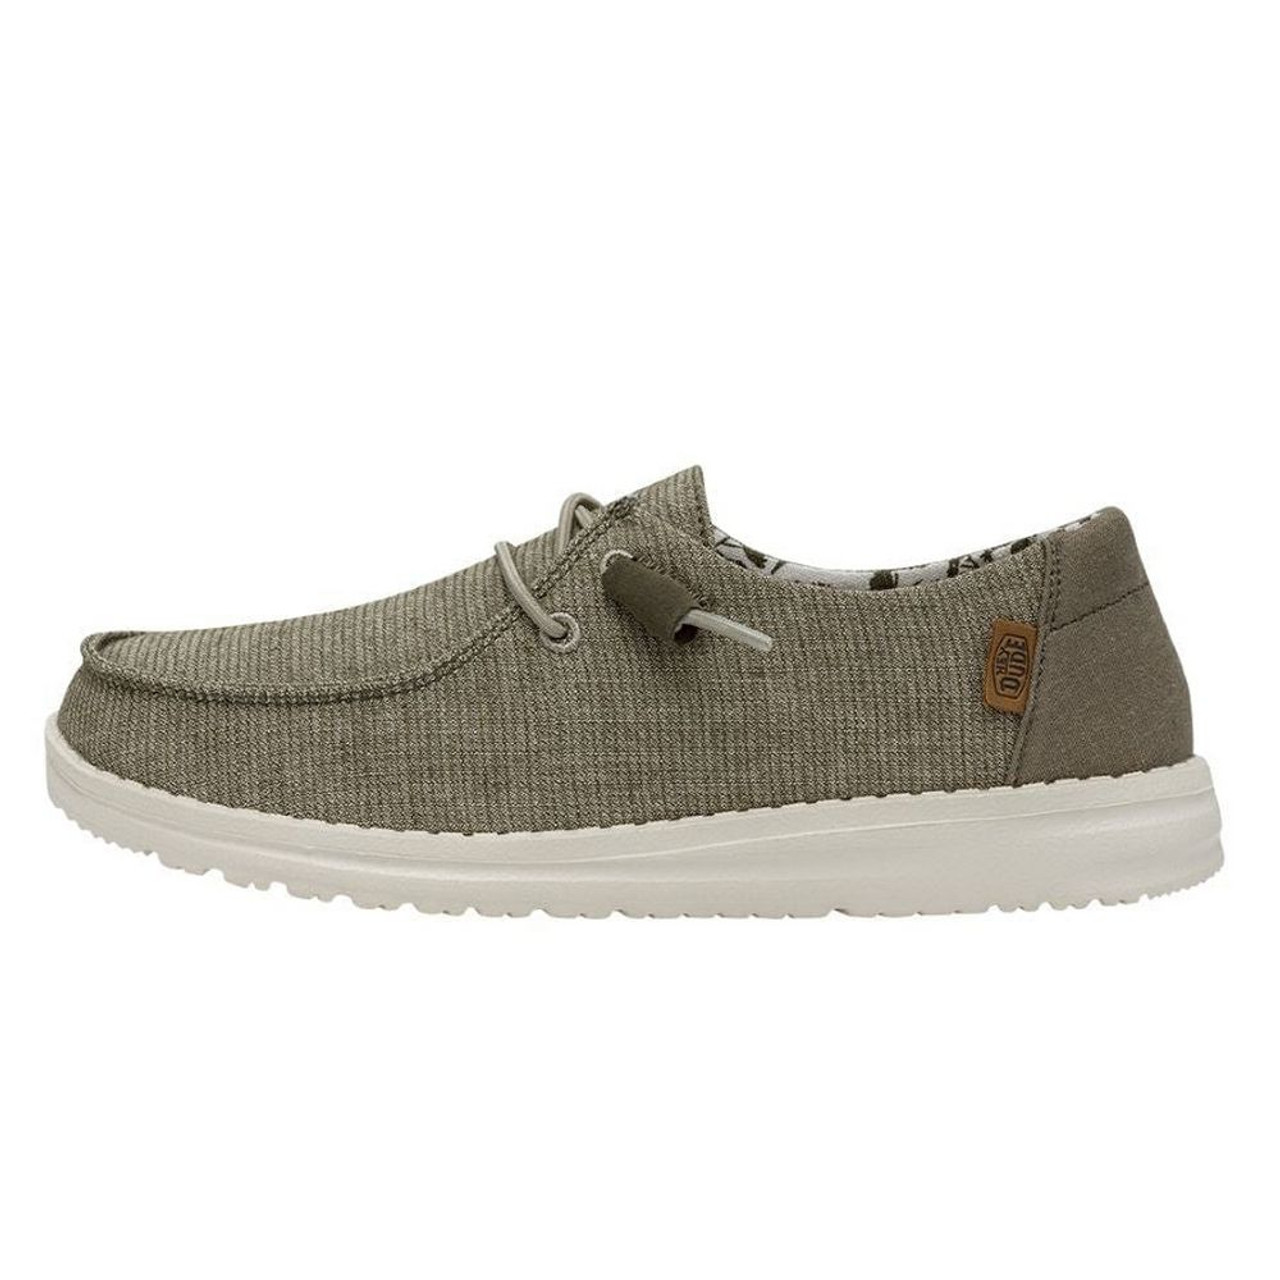 Hey Dude Shoes Women's Wendy Shoes in Chambray White Nut